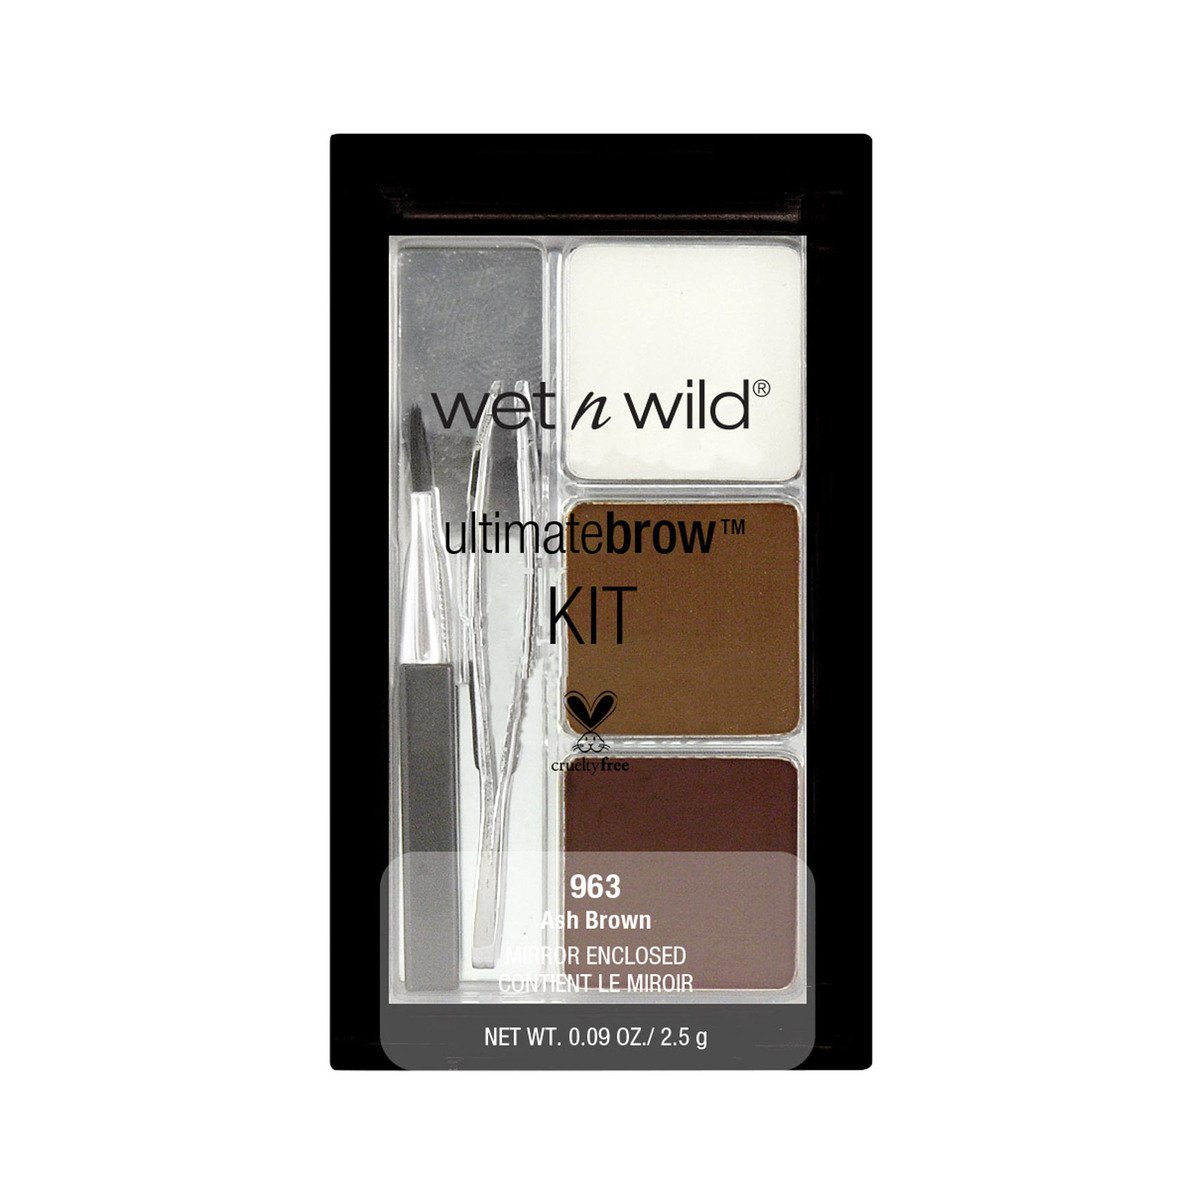 Wet And Wild Brow Kit -Ash Brown WnW000E963 1pc